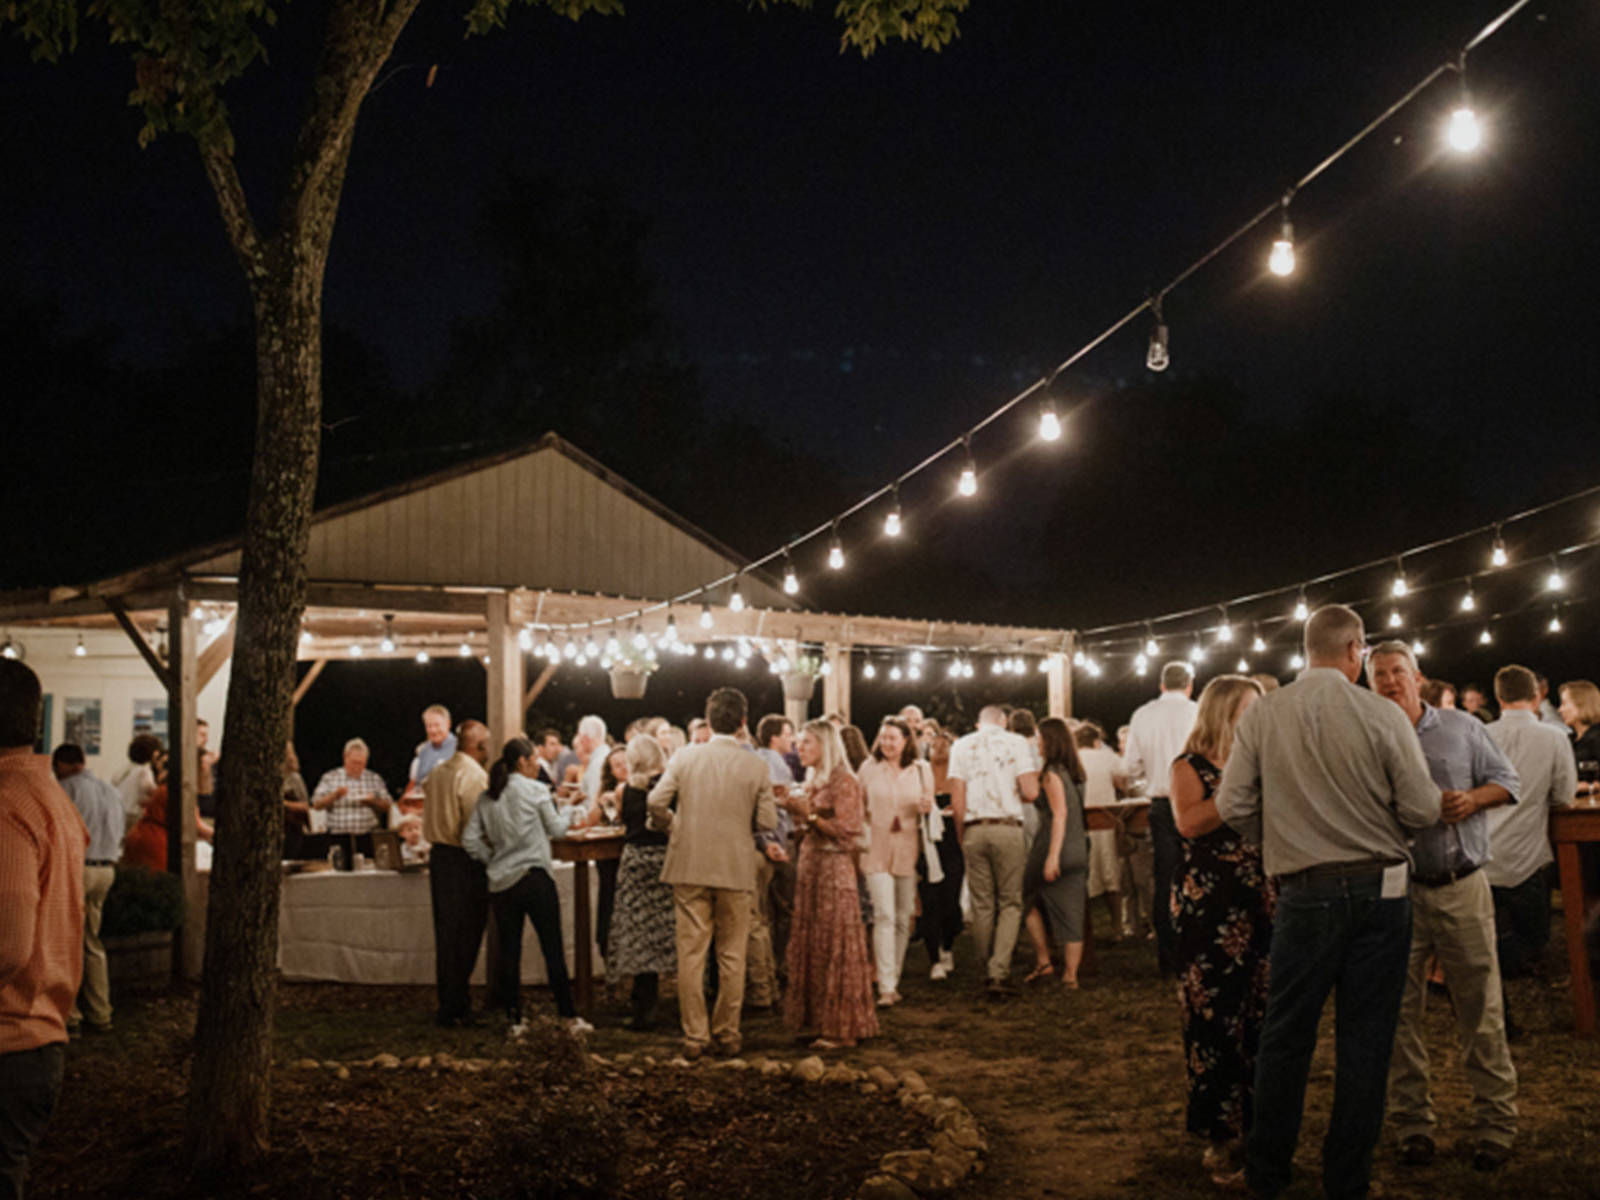 Shalom Farms | Group gathered at farm for evening event